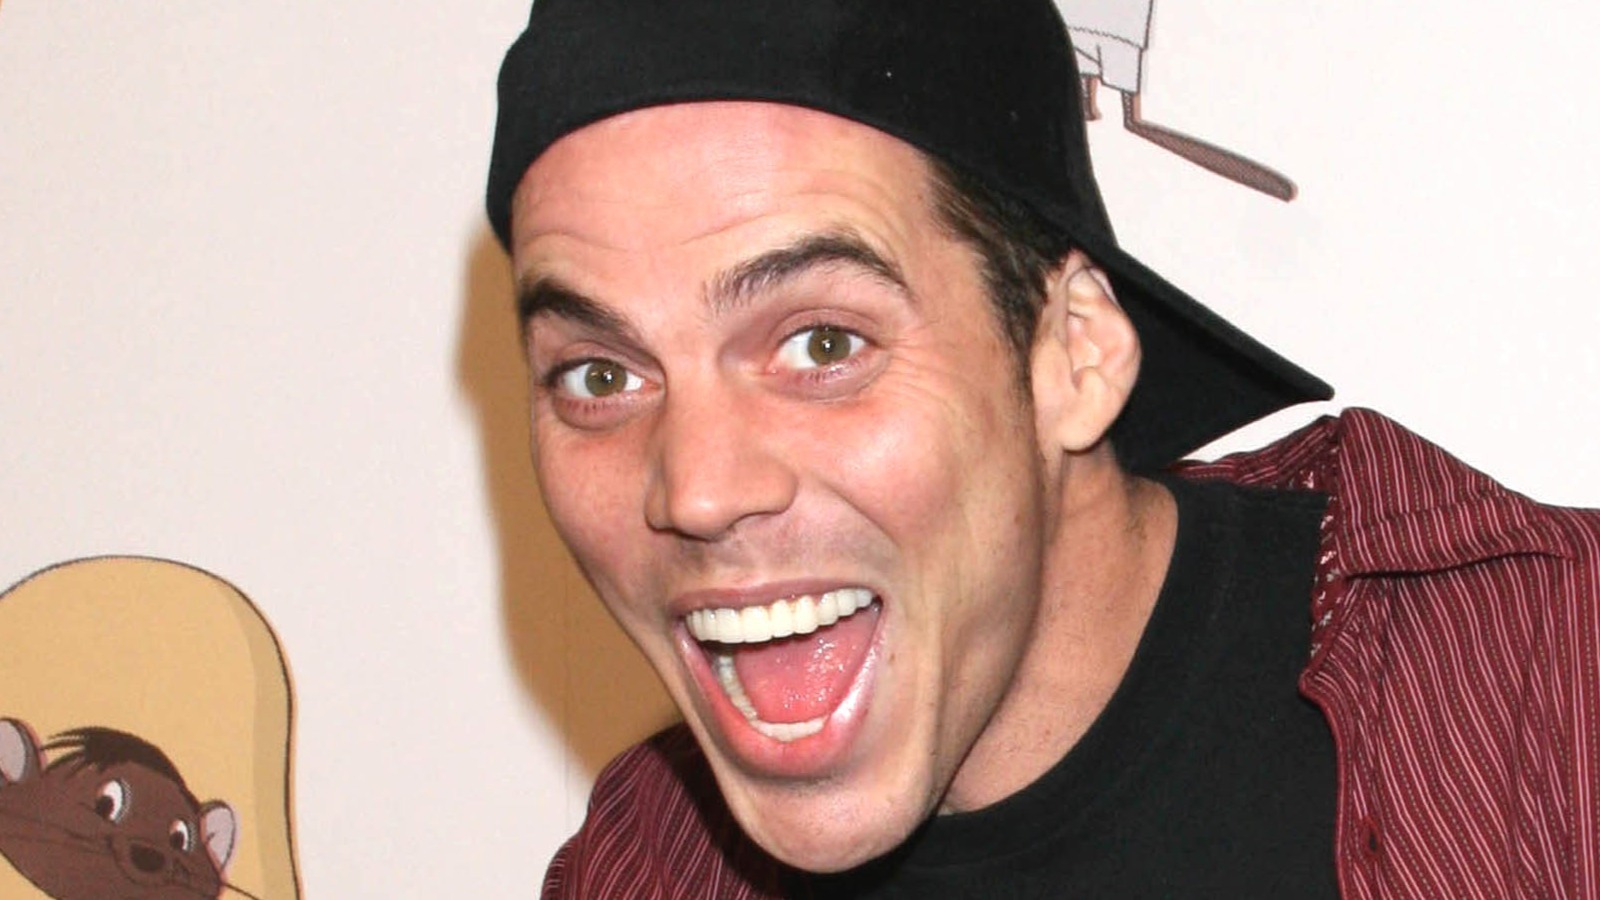 Jackass 5 to Feature 45 Minutes of Steve-O Attempting a Pokemon